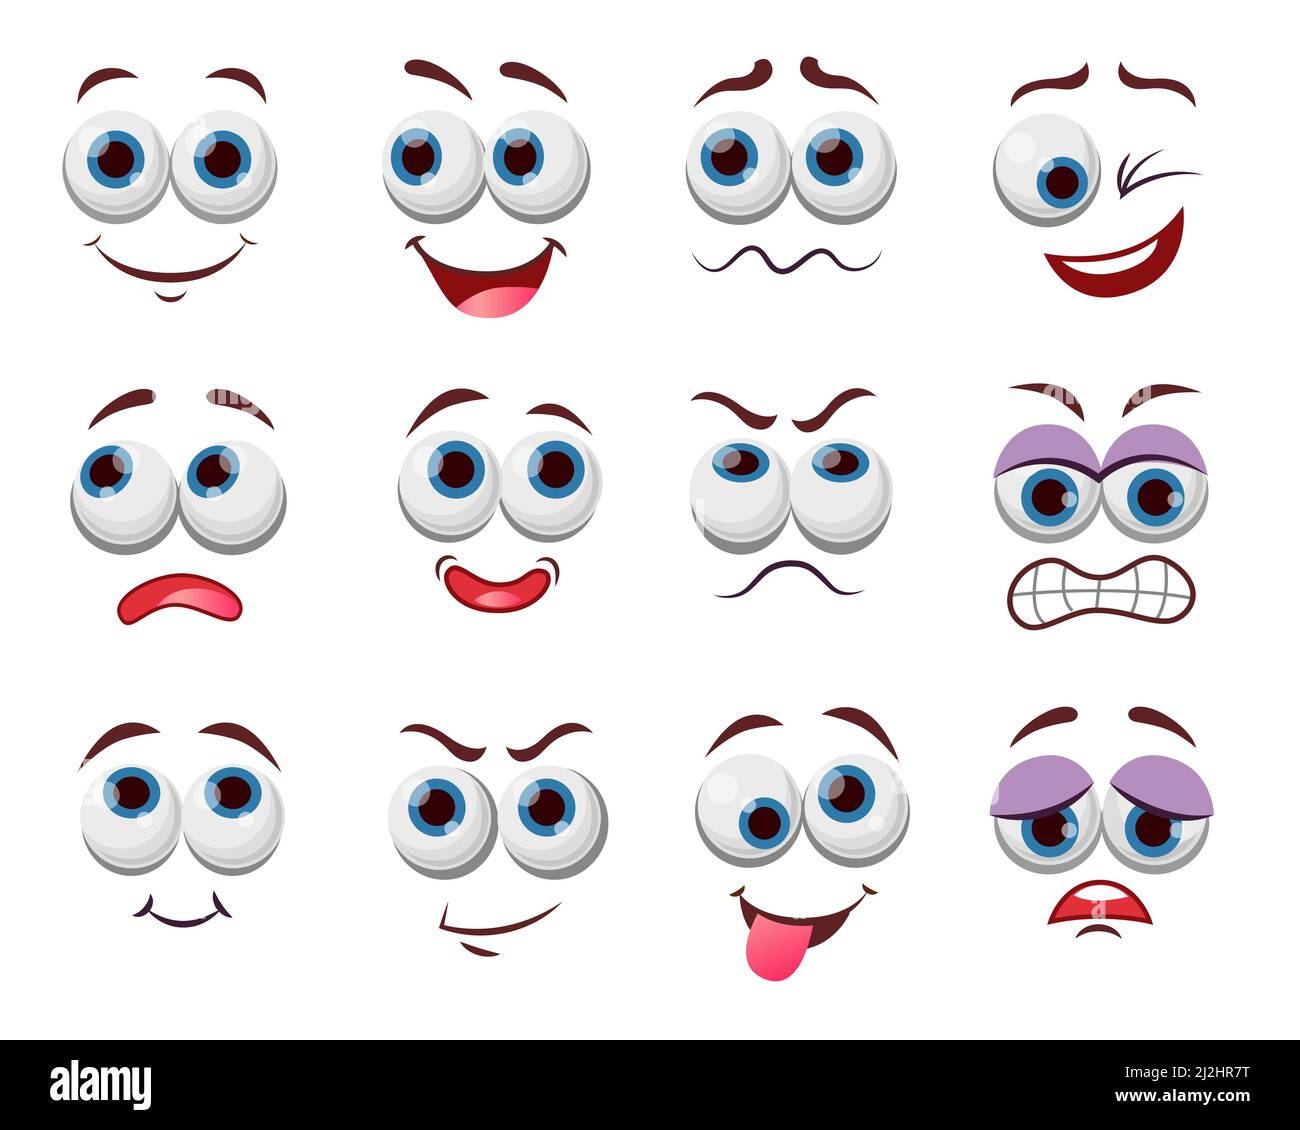 funny angry cartoon faces